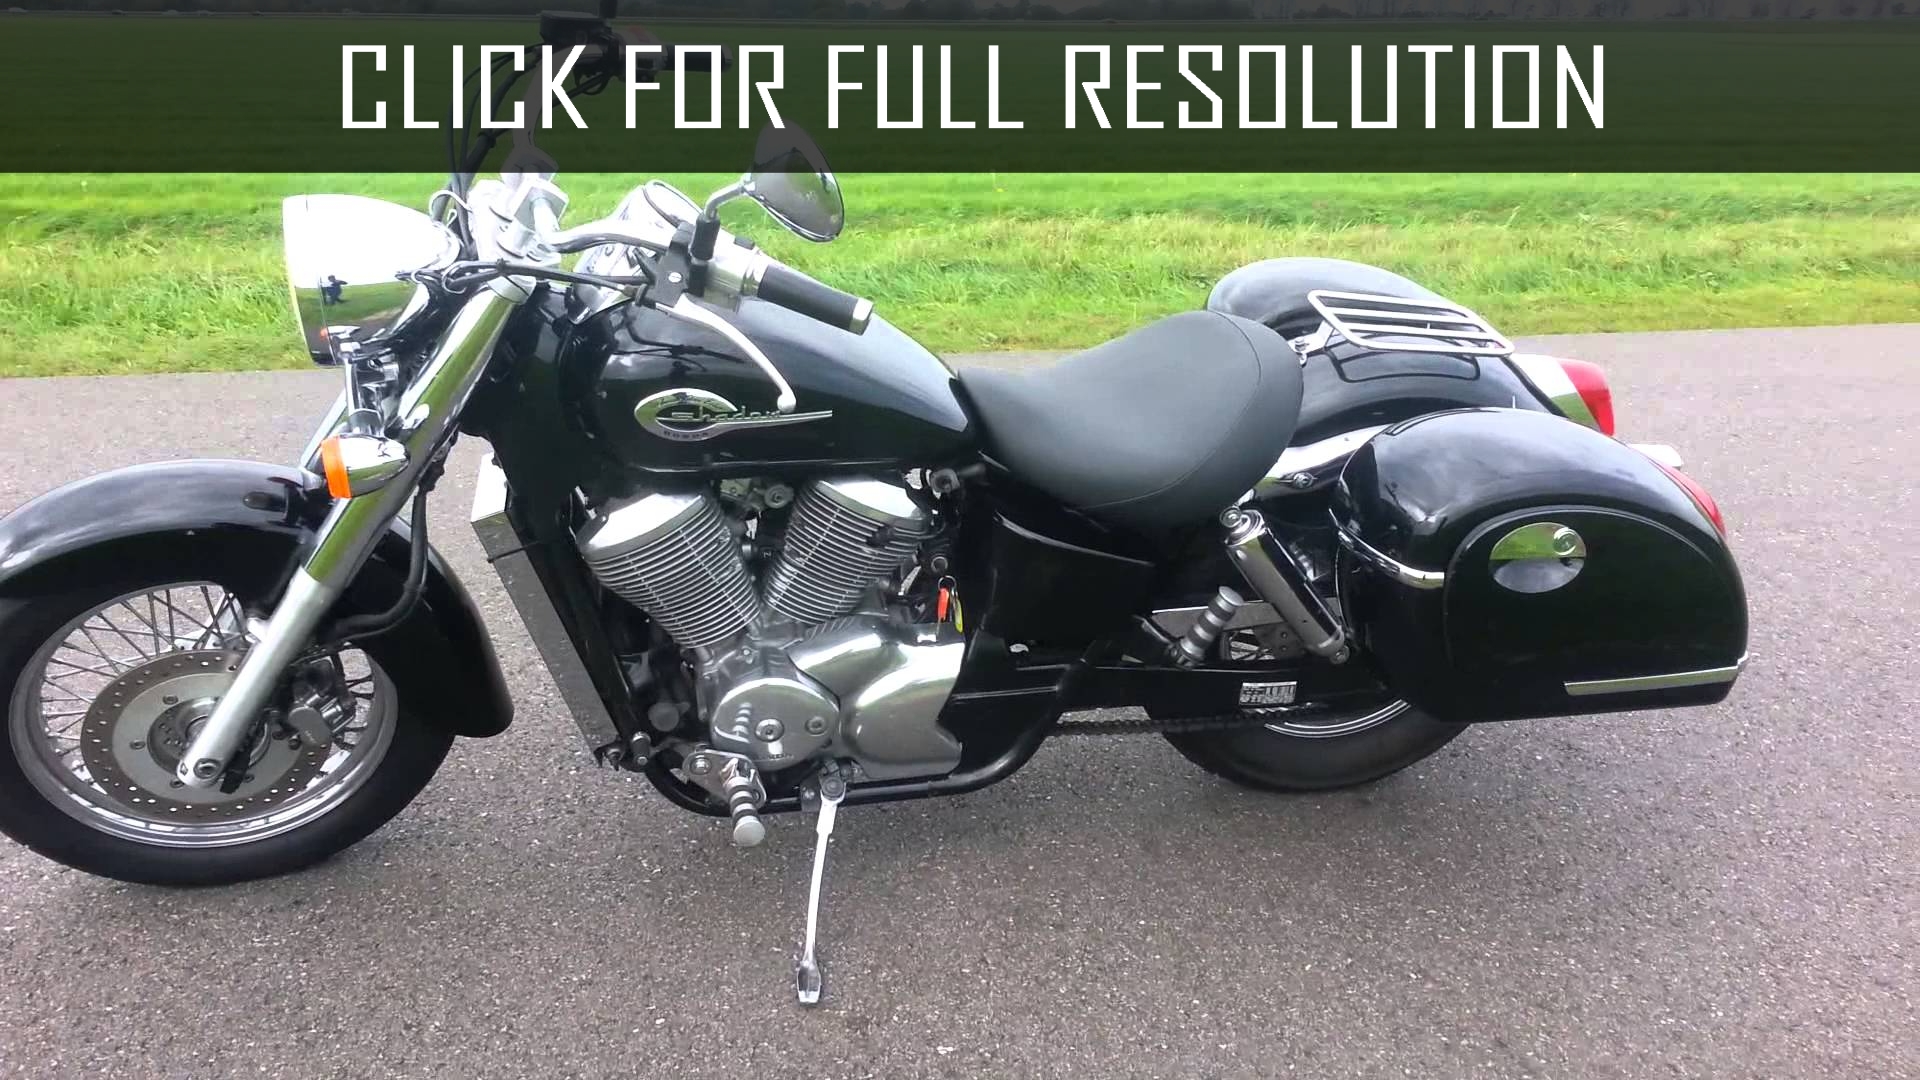 Honda Shadow 750 Ace - amazing photo gallery, some information and ...